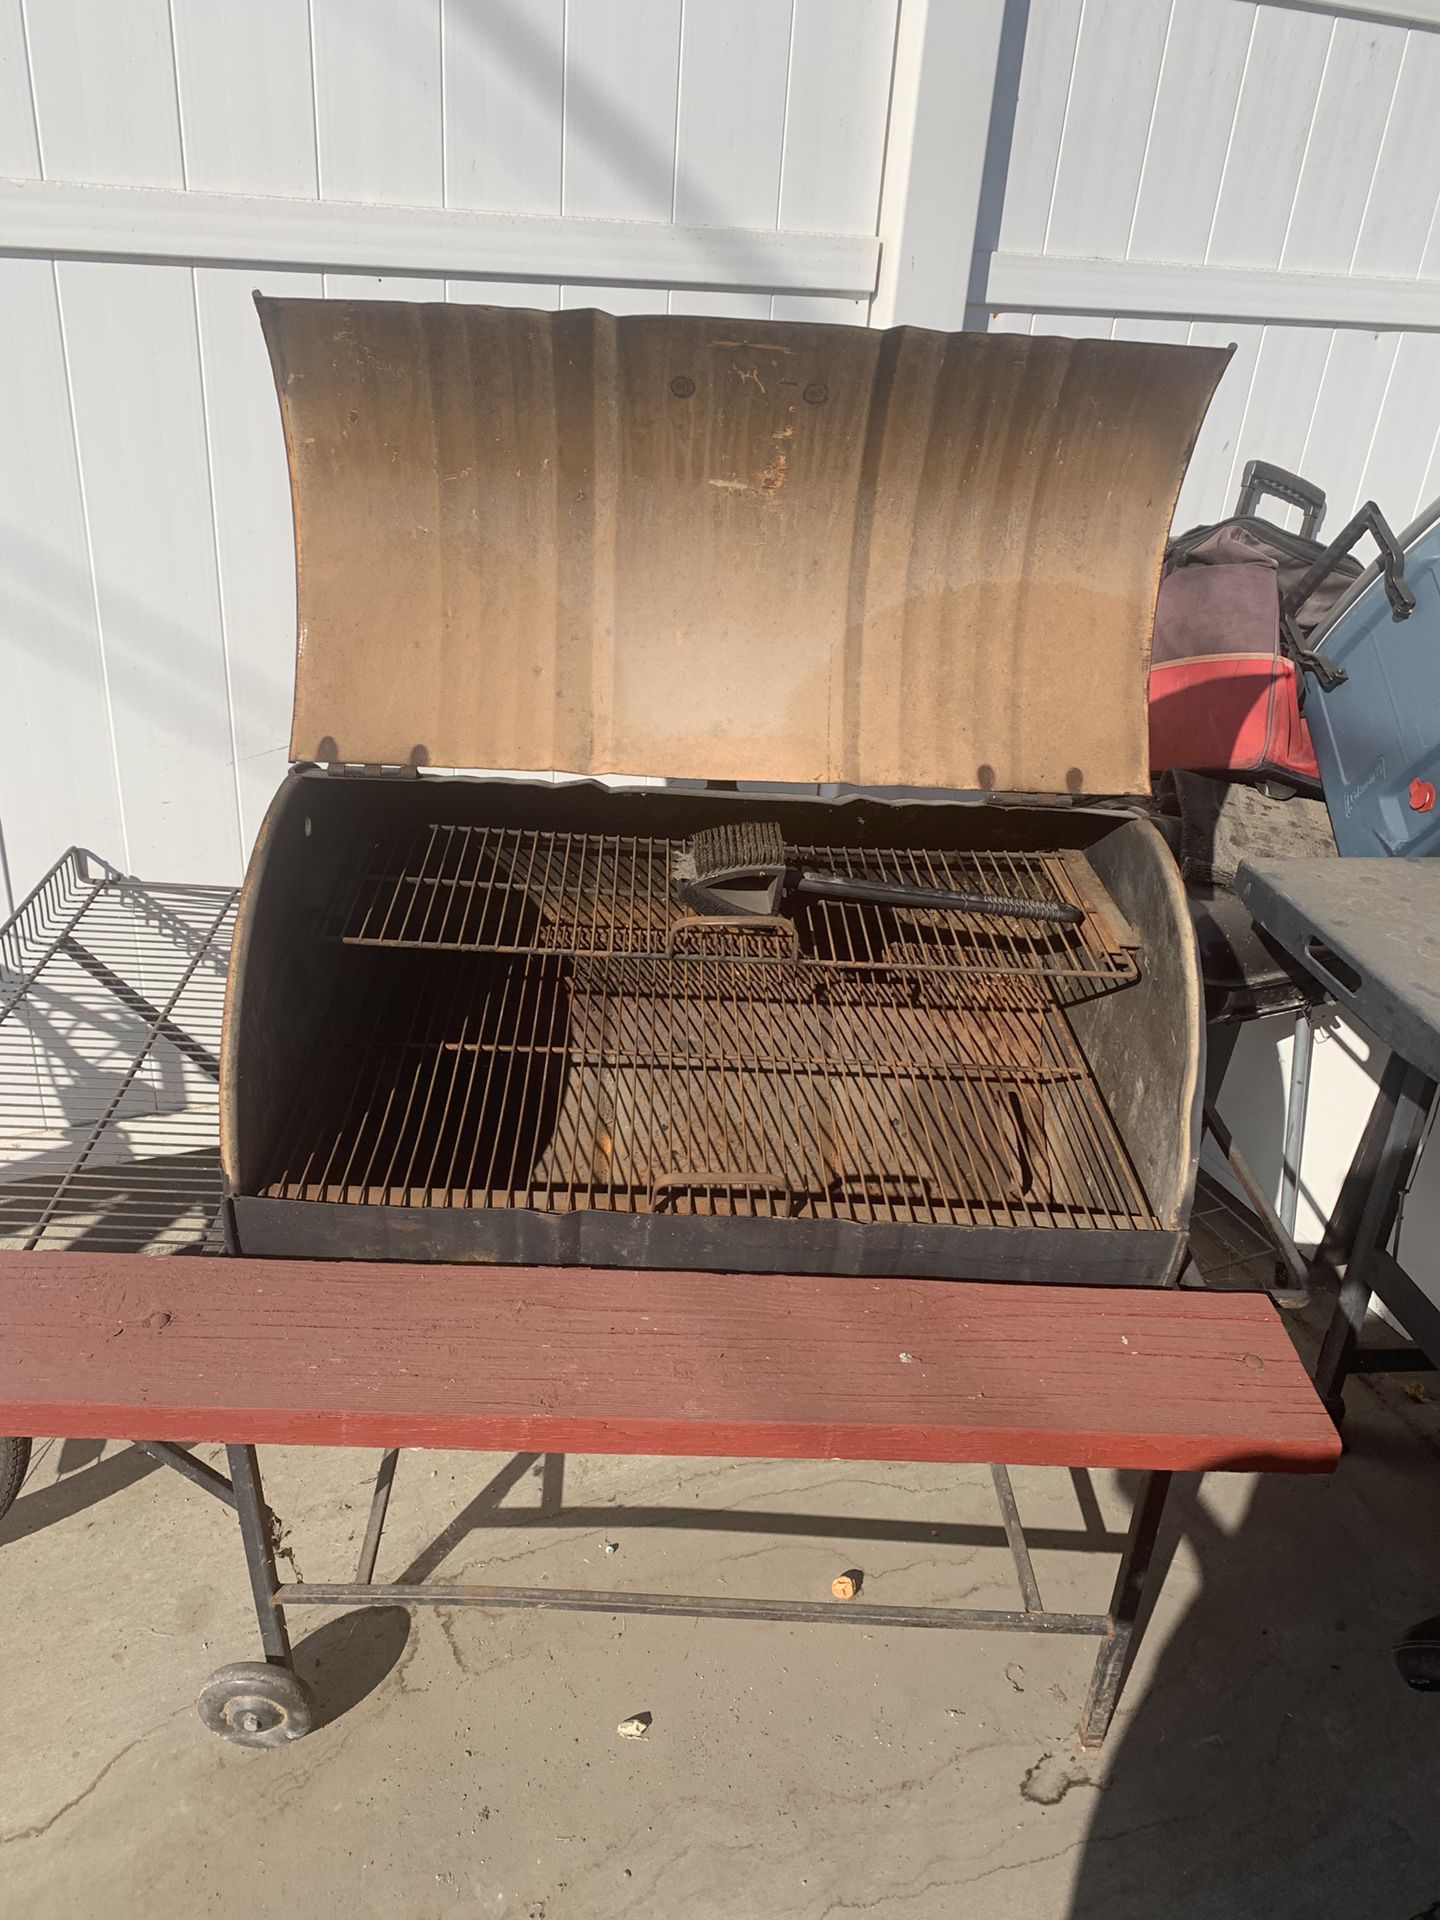 Large bbq grill in good condition asking 85